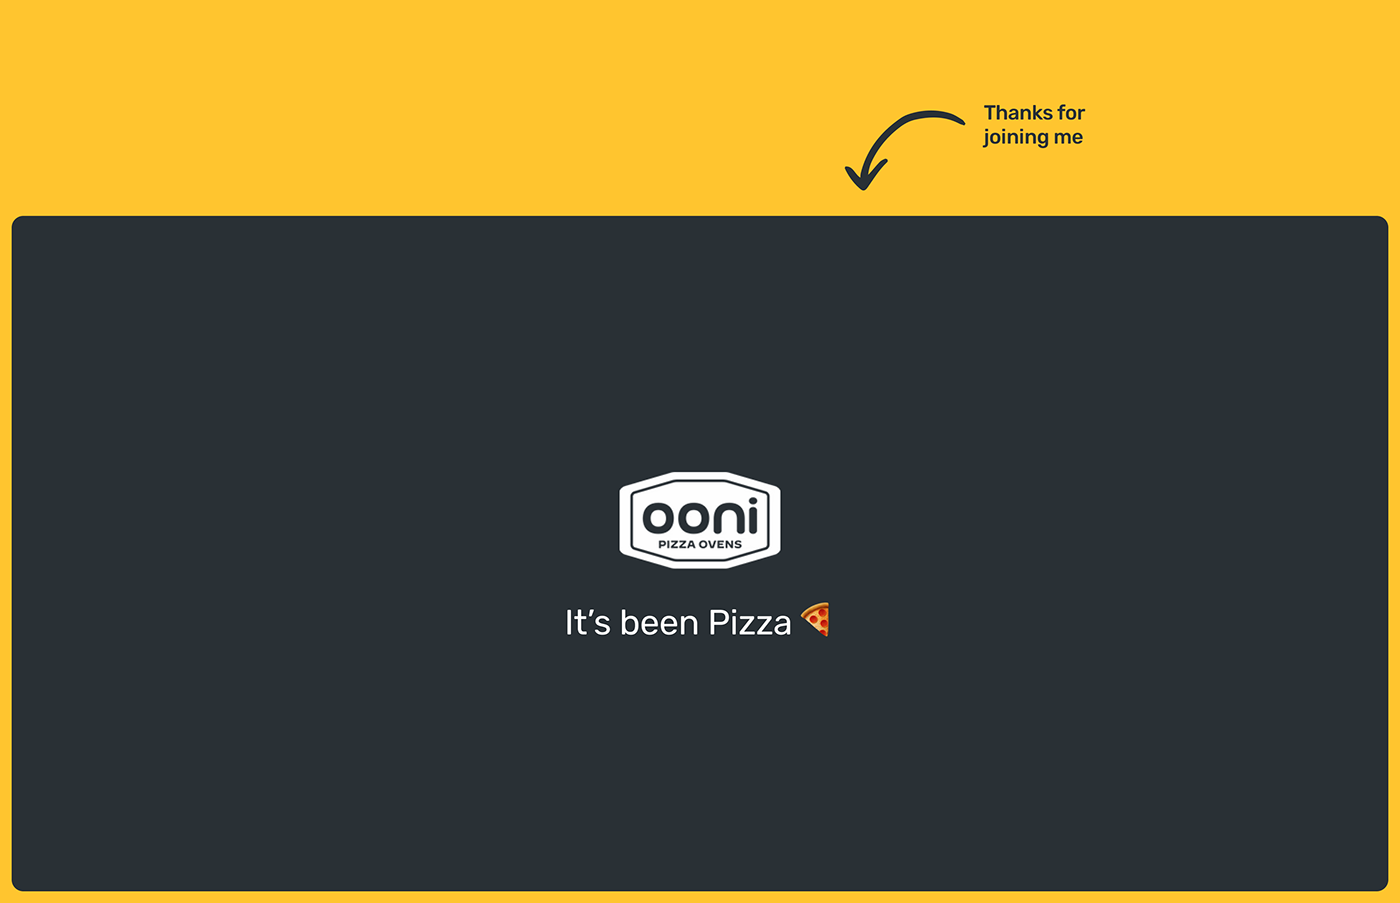 ui design user interface ooni Pizza pizza oven